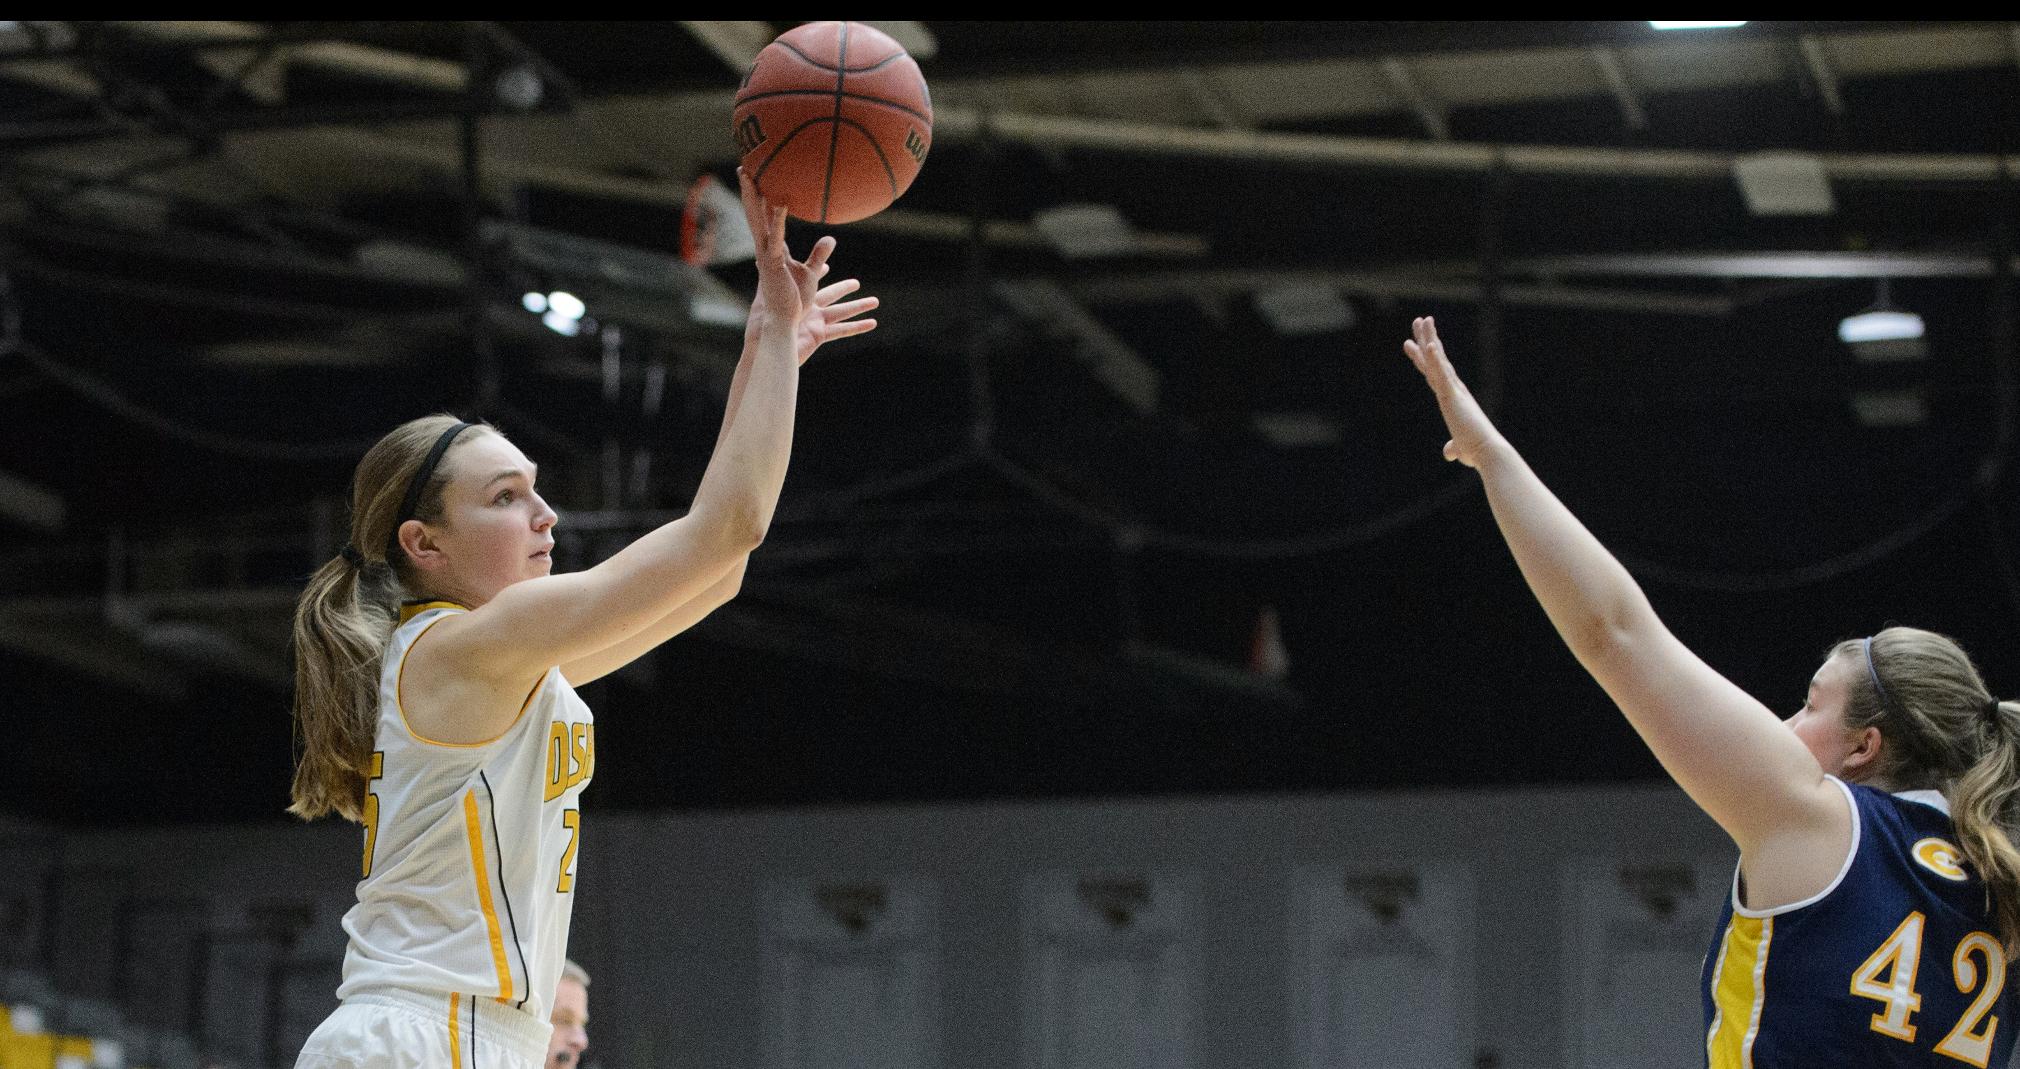 Marissa Selner earned her second double-double of the season by totaling 11 points and 10 rebounds.